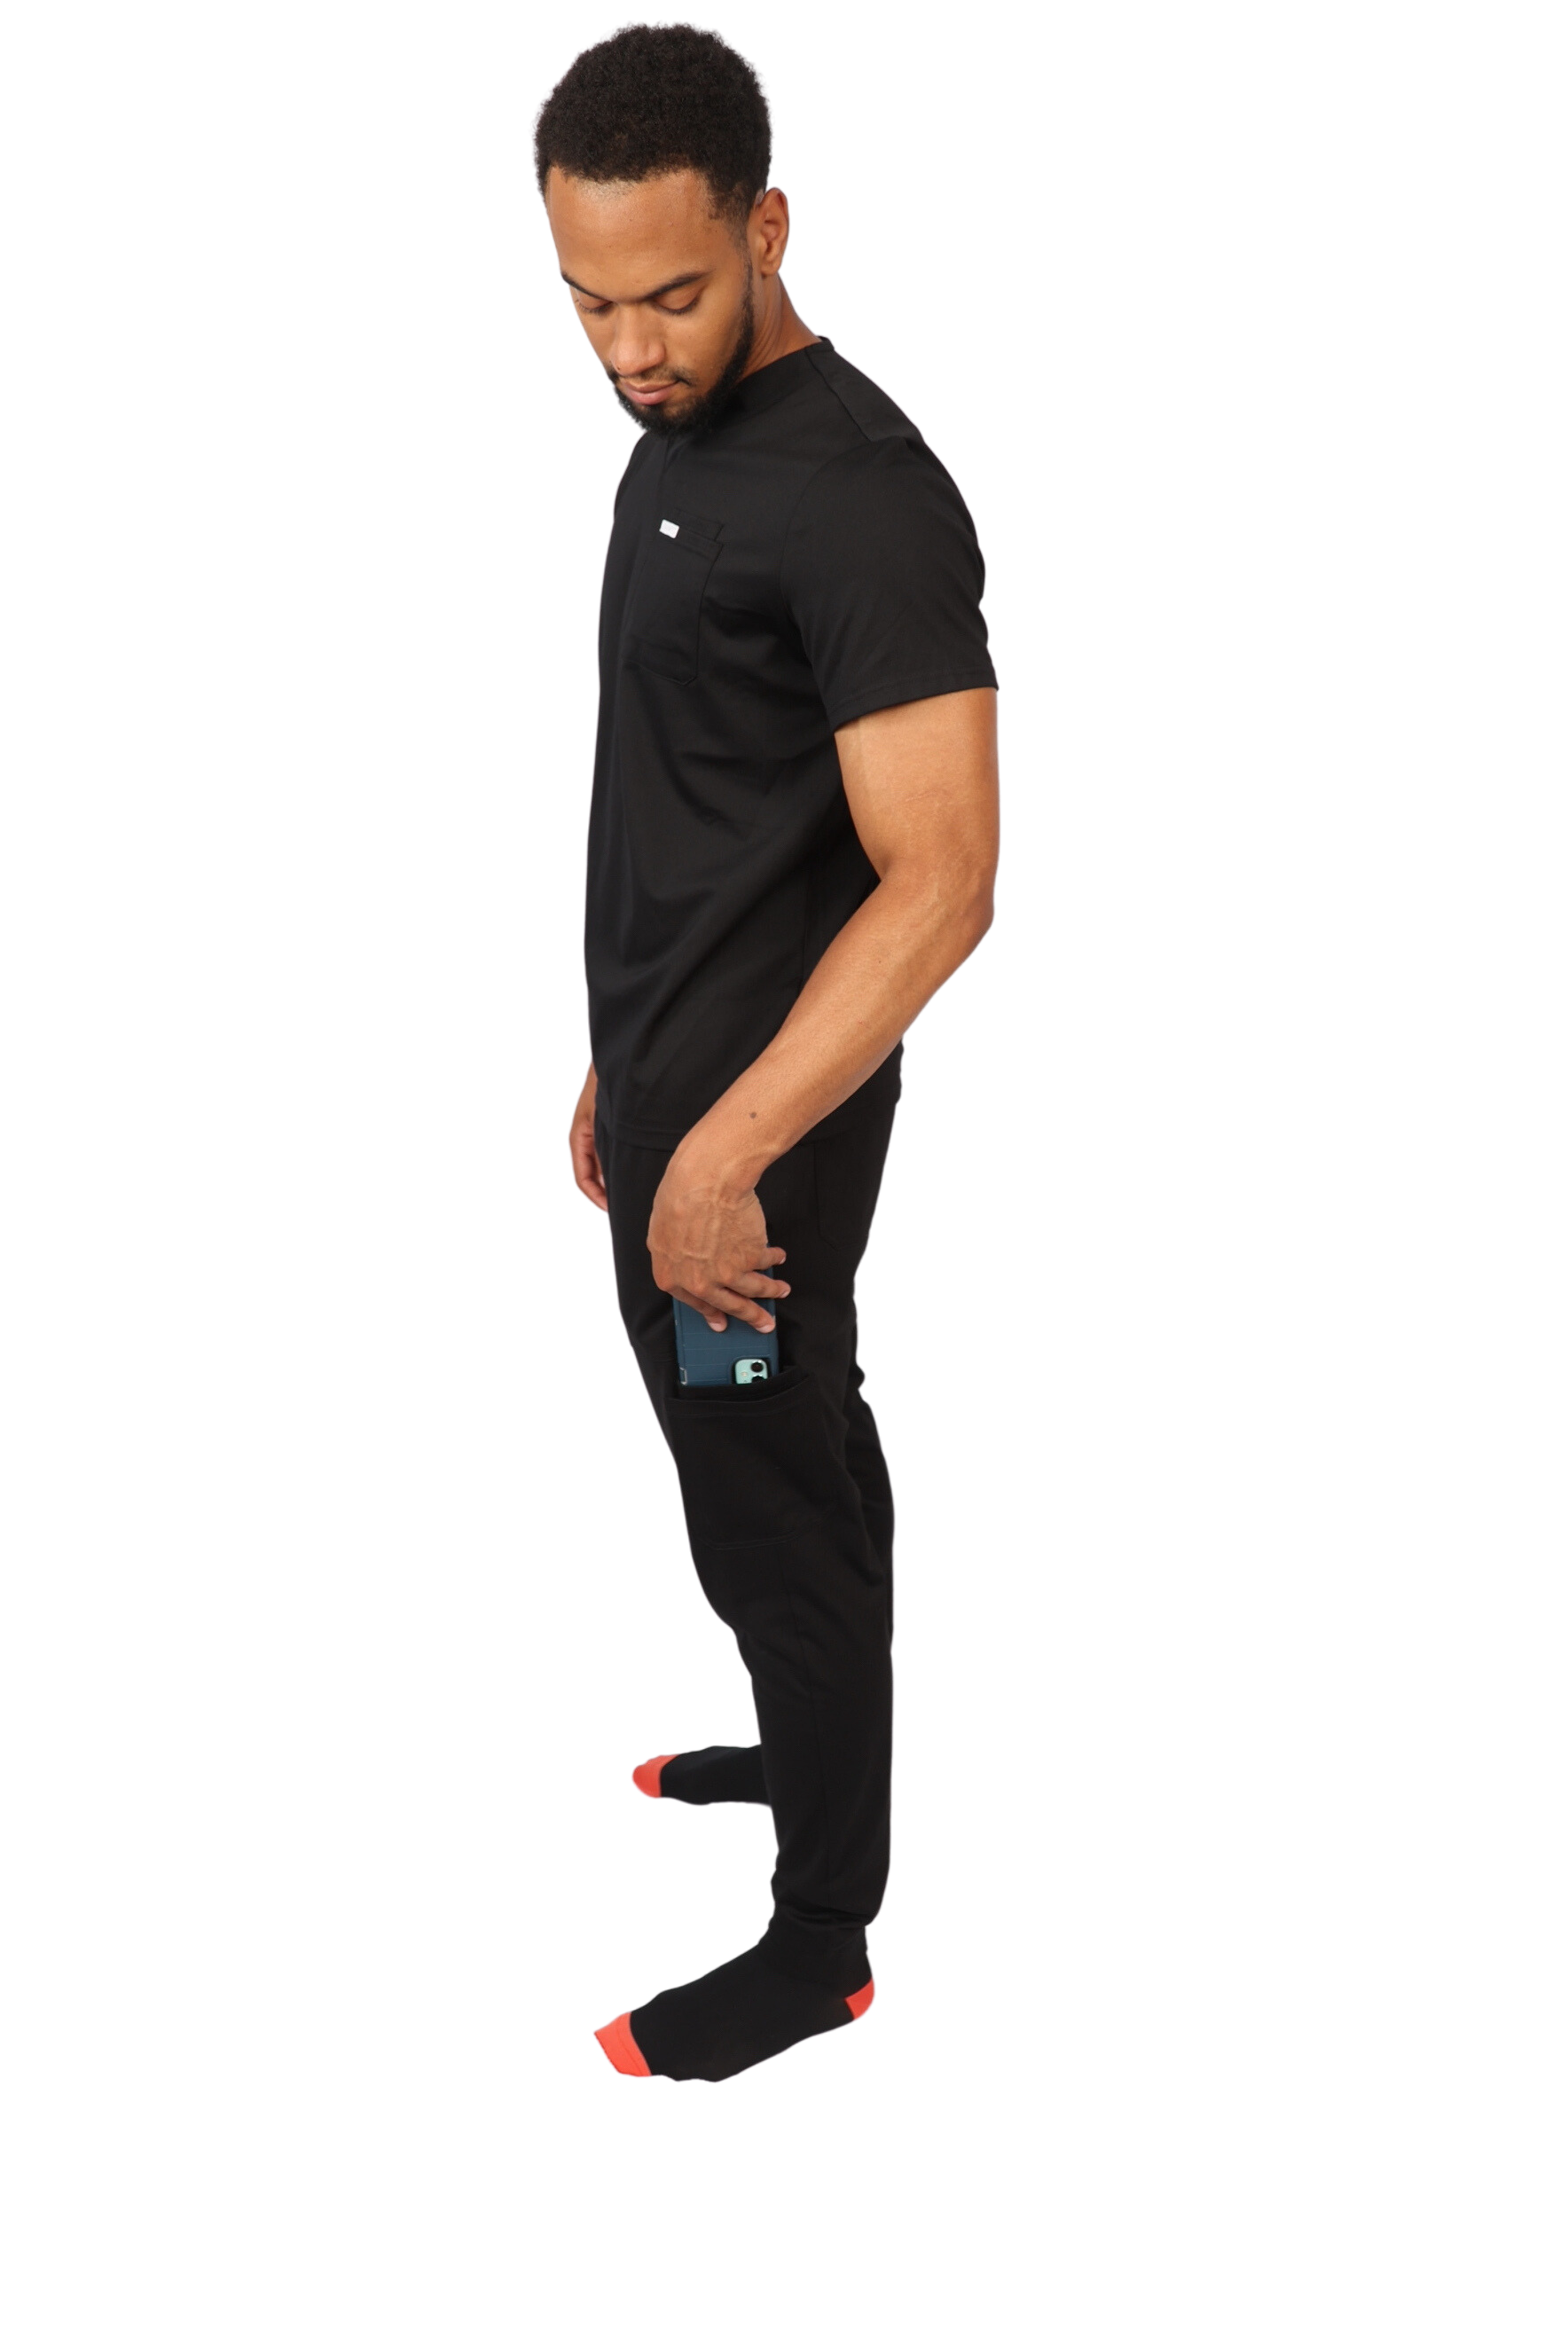 medical work uniform Scrubmates modern fit jogger black scrub pants for men made to pair perfectly with our modern fit scrub top. Our exclusive design is on trend, professional and stylish. Made from a superior quality nylon/rayon/spandex fabric mix, this set offers unparalleled all-day comfort and the ultimate amount of stretch. Our thoughtful and innovative design offers 8 deep pants pockets. best scrubs for men figs scrubs